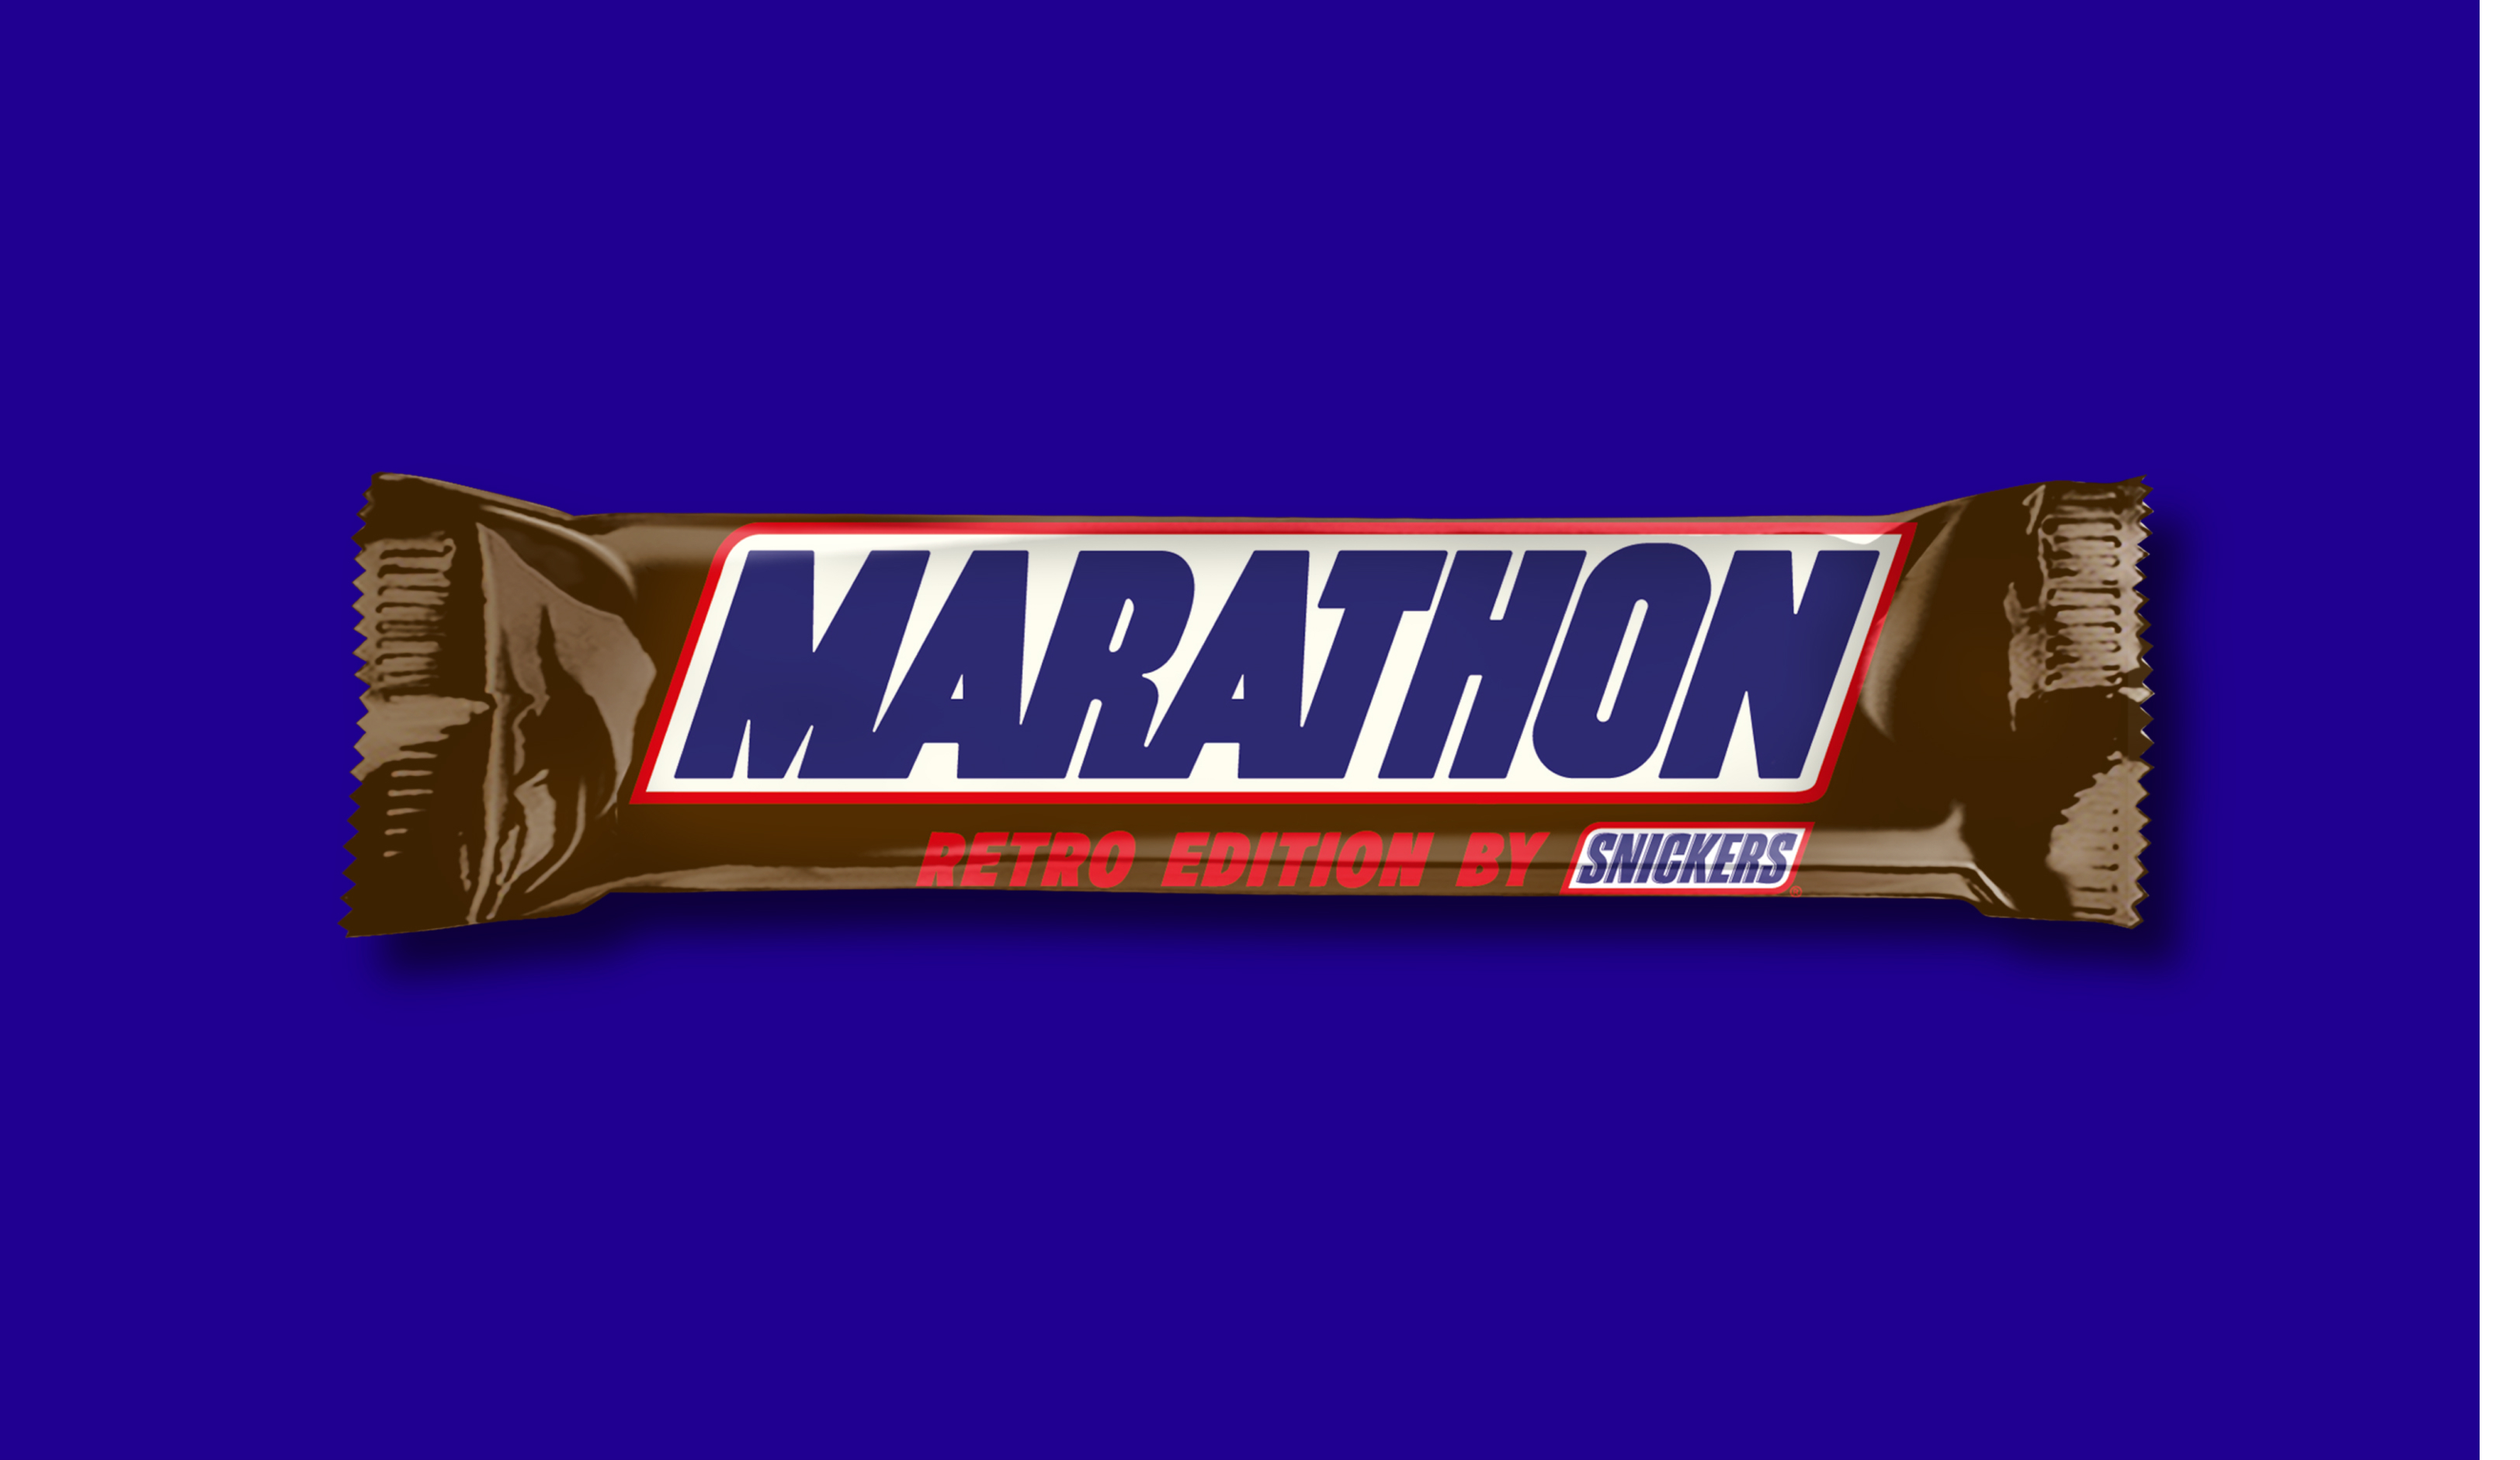 Package Snickers bar called MARATHON bar on blue background